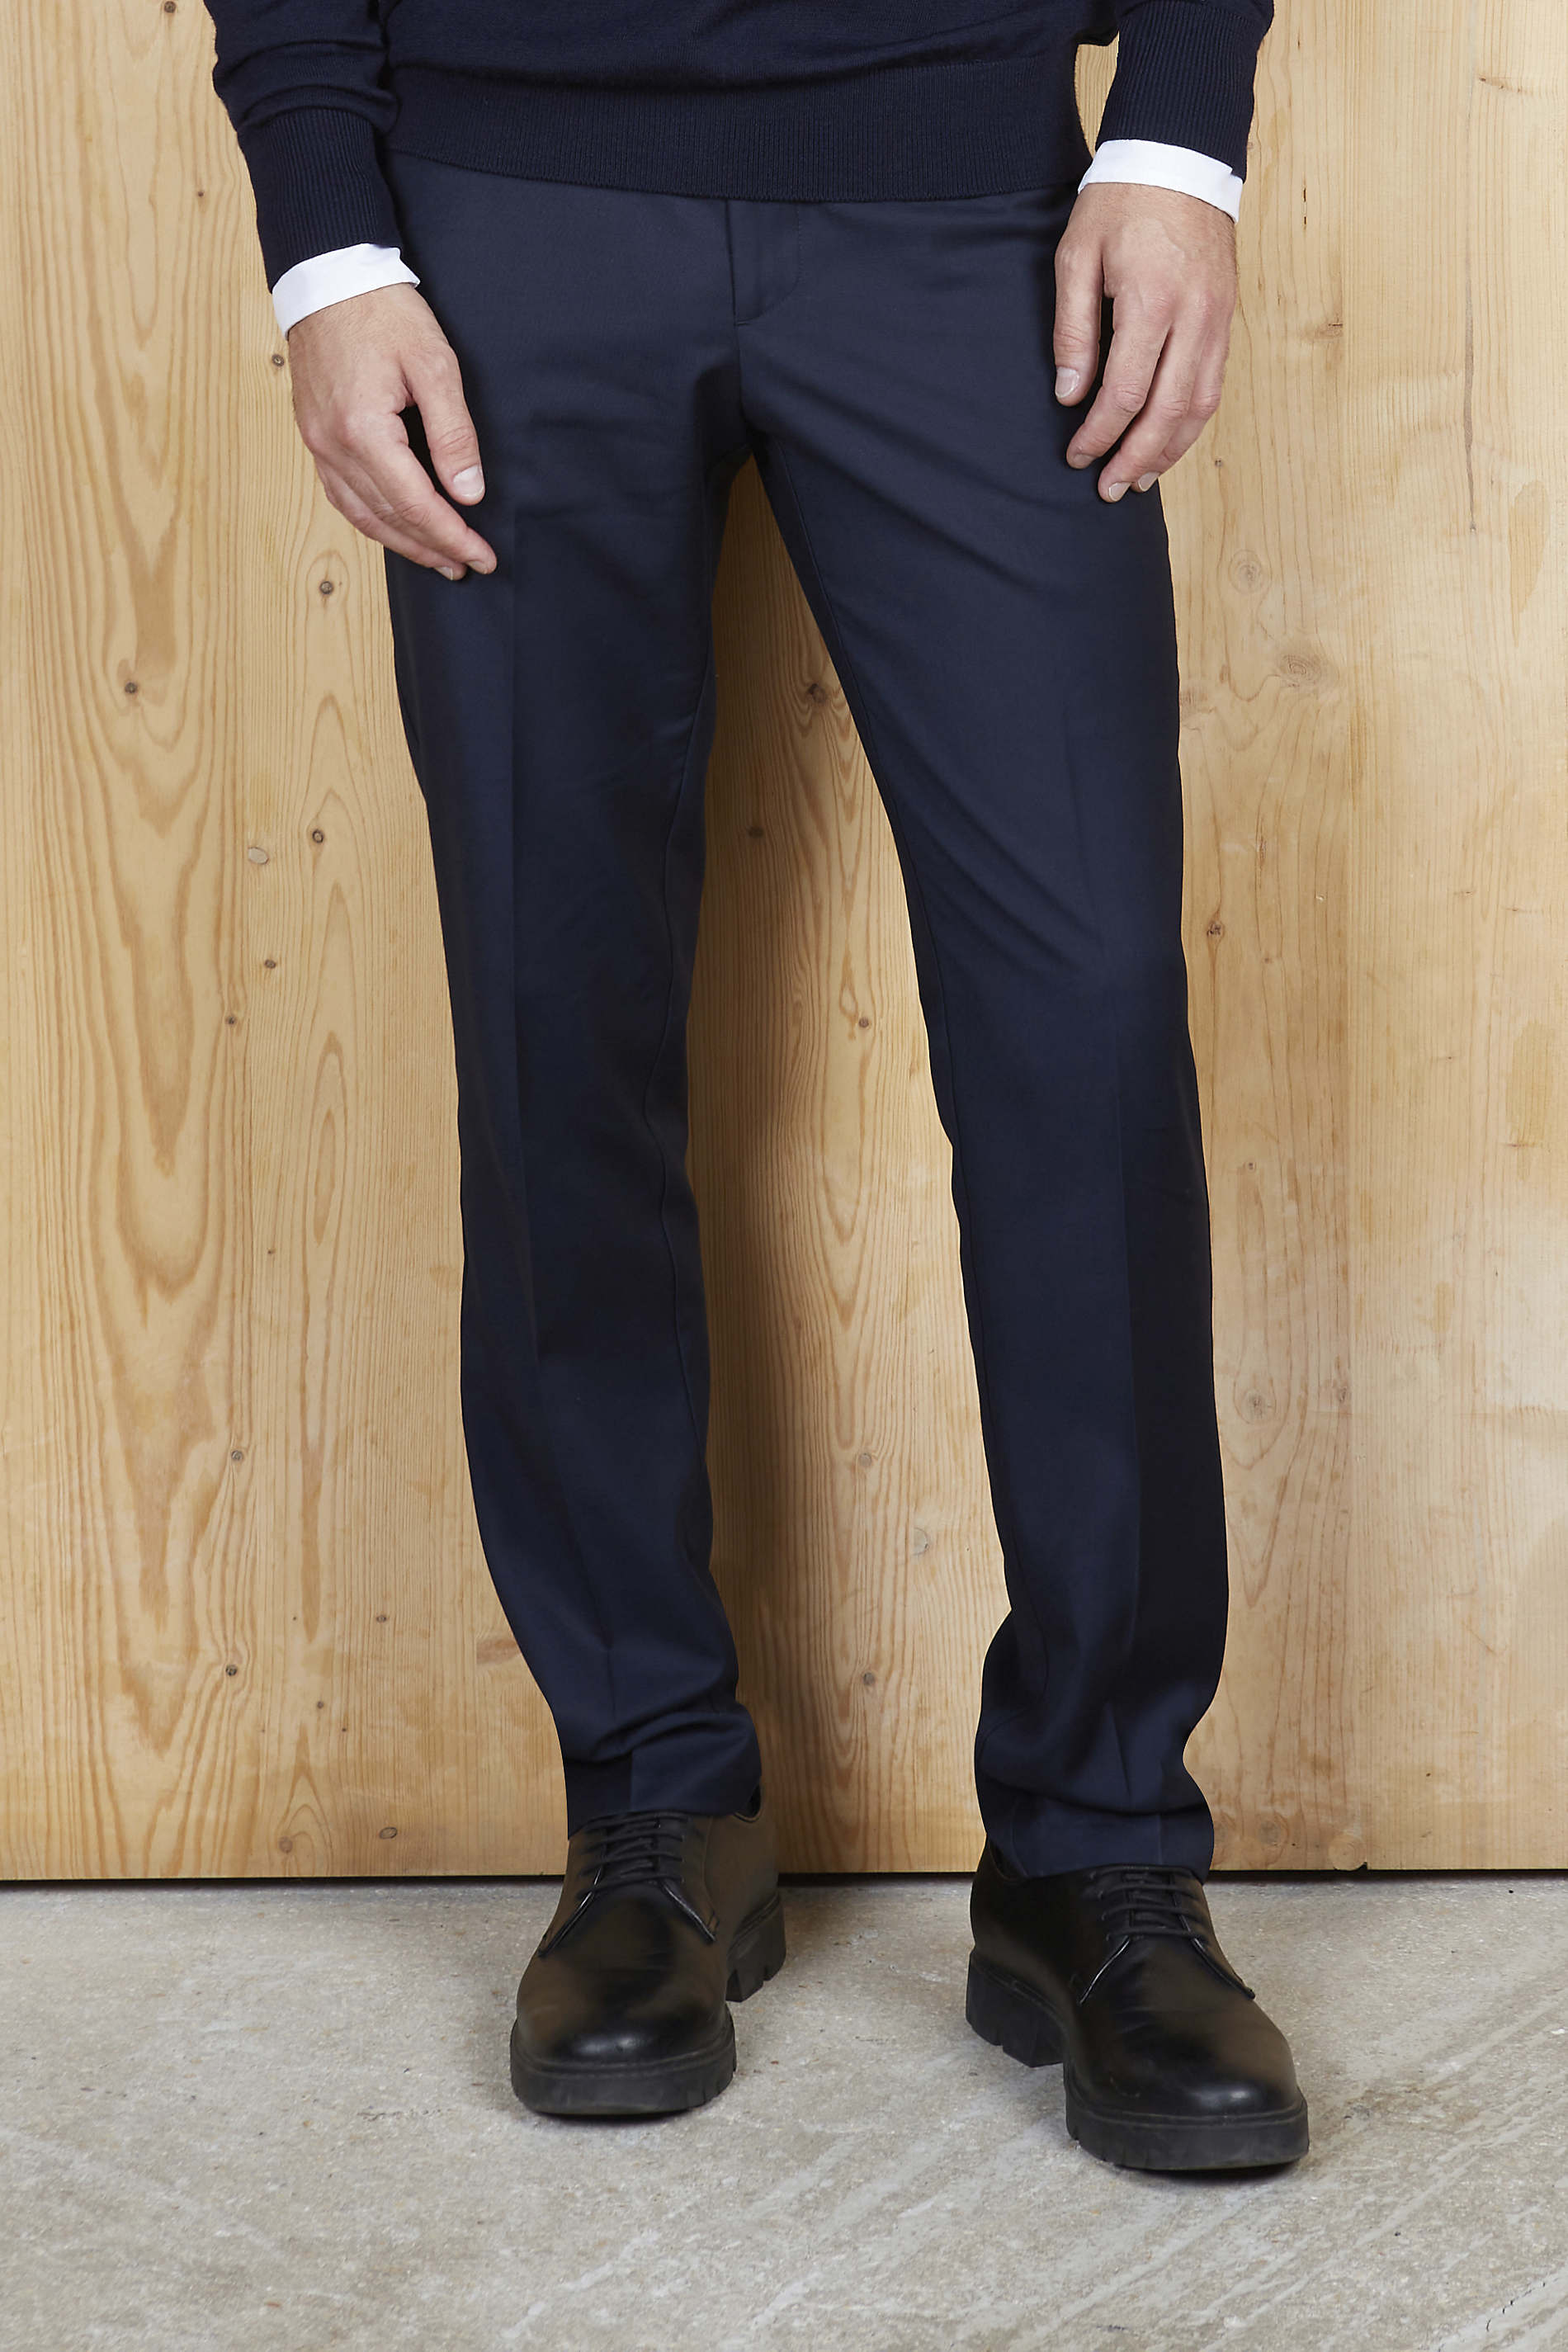 MEN'S ELASTICATED WAIST SUIT TROUSERS<br/><p>These smart and timeless trousers are an iconic piece of men’s wardrobe. With their mid-season soft fabric and elasticated waistband, they fit all body shapes. They can be worn as a part of a three-piece suit for formal events or with a T-shirt for a casual style.</p> NEOBLU GABIN MEN